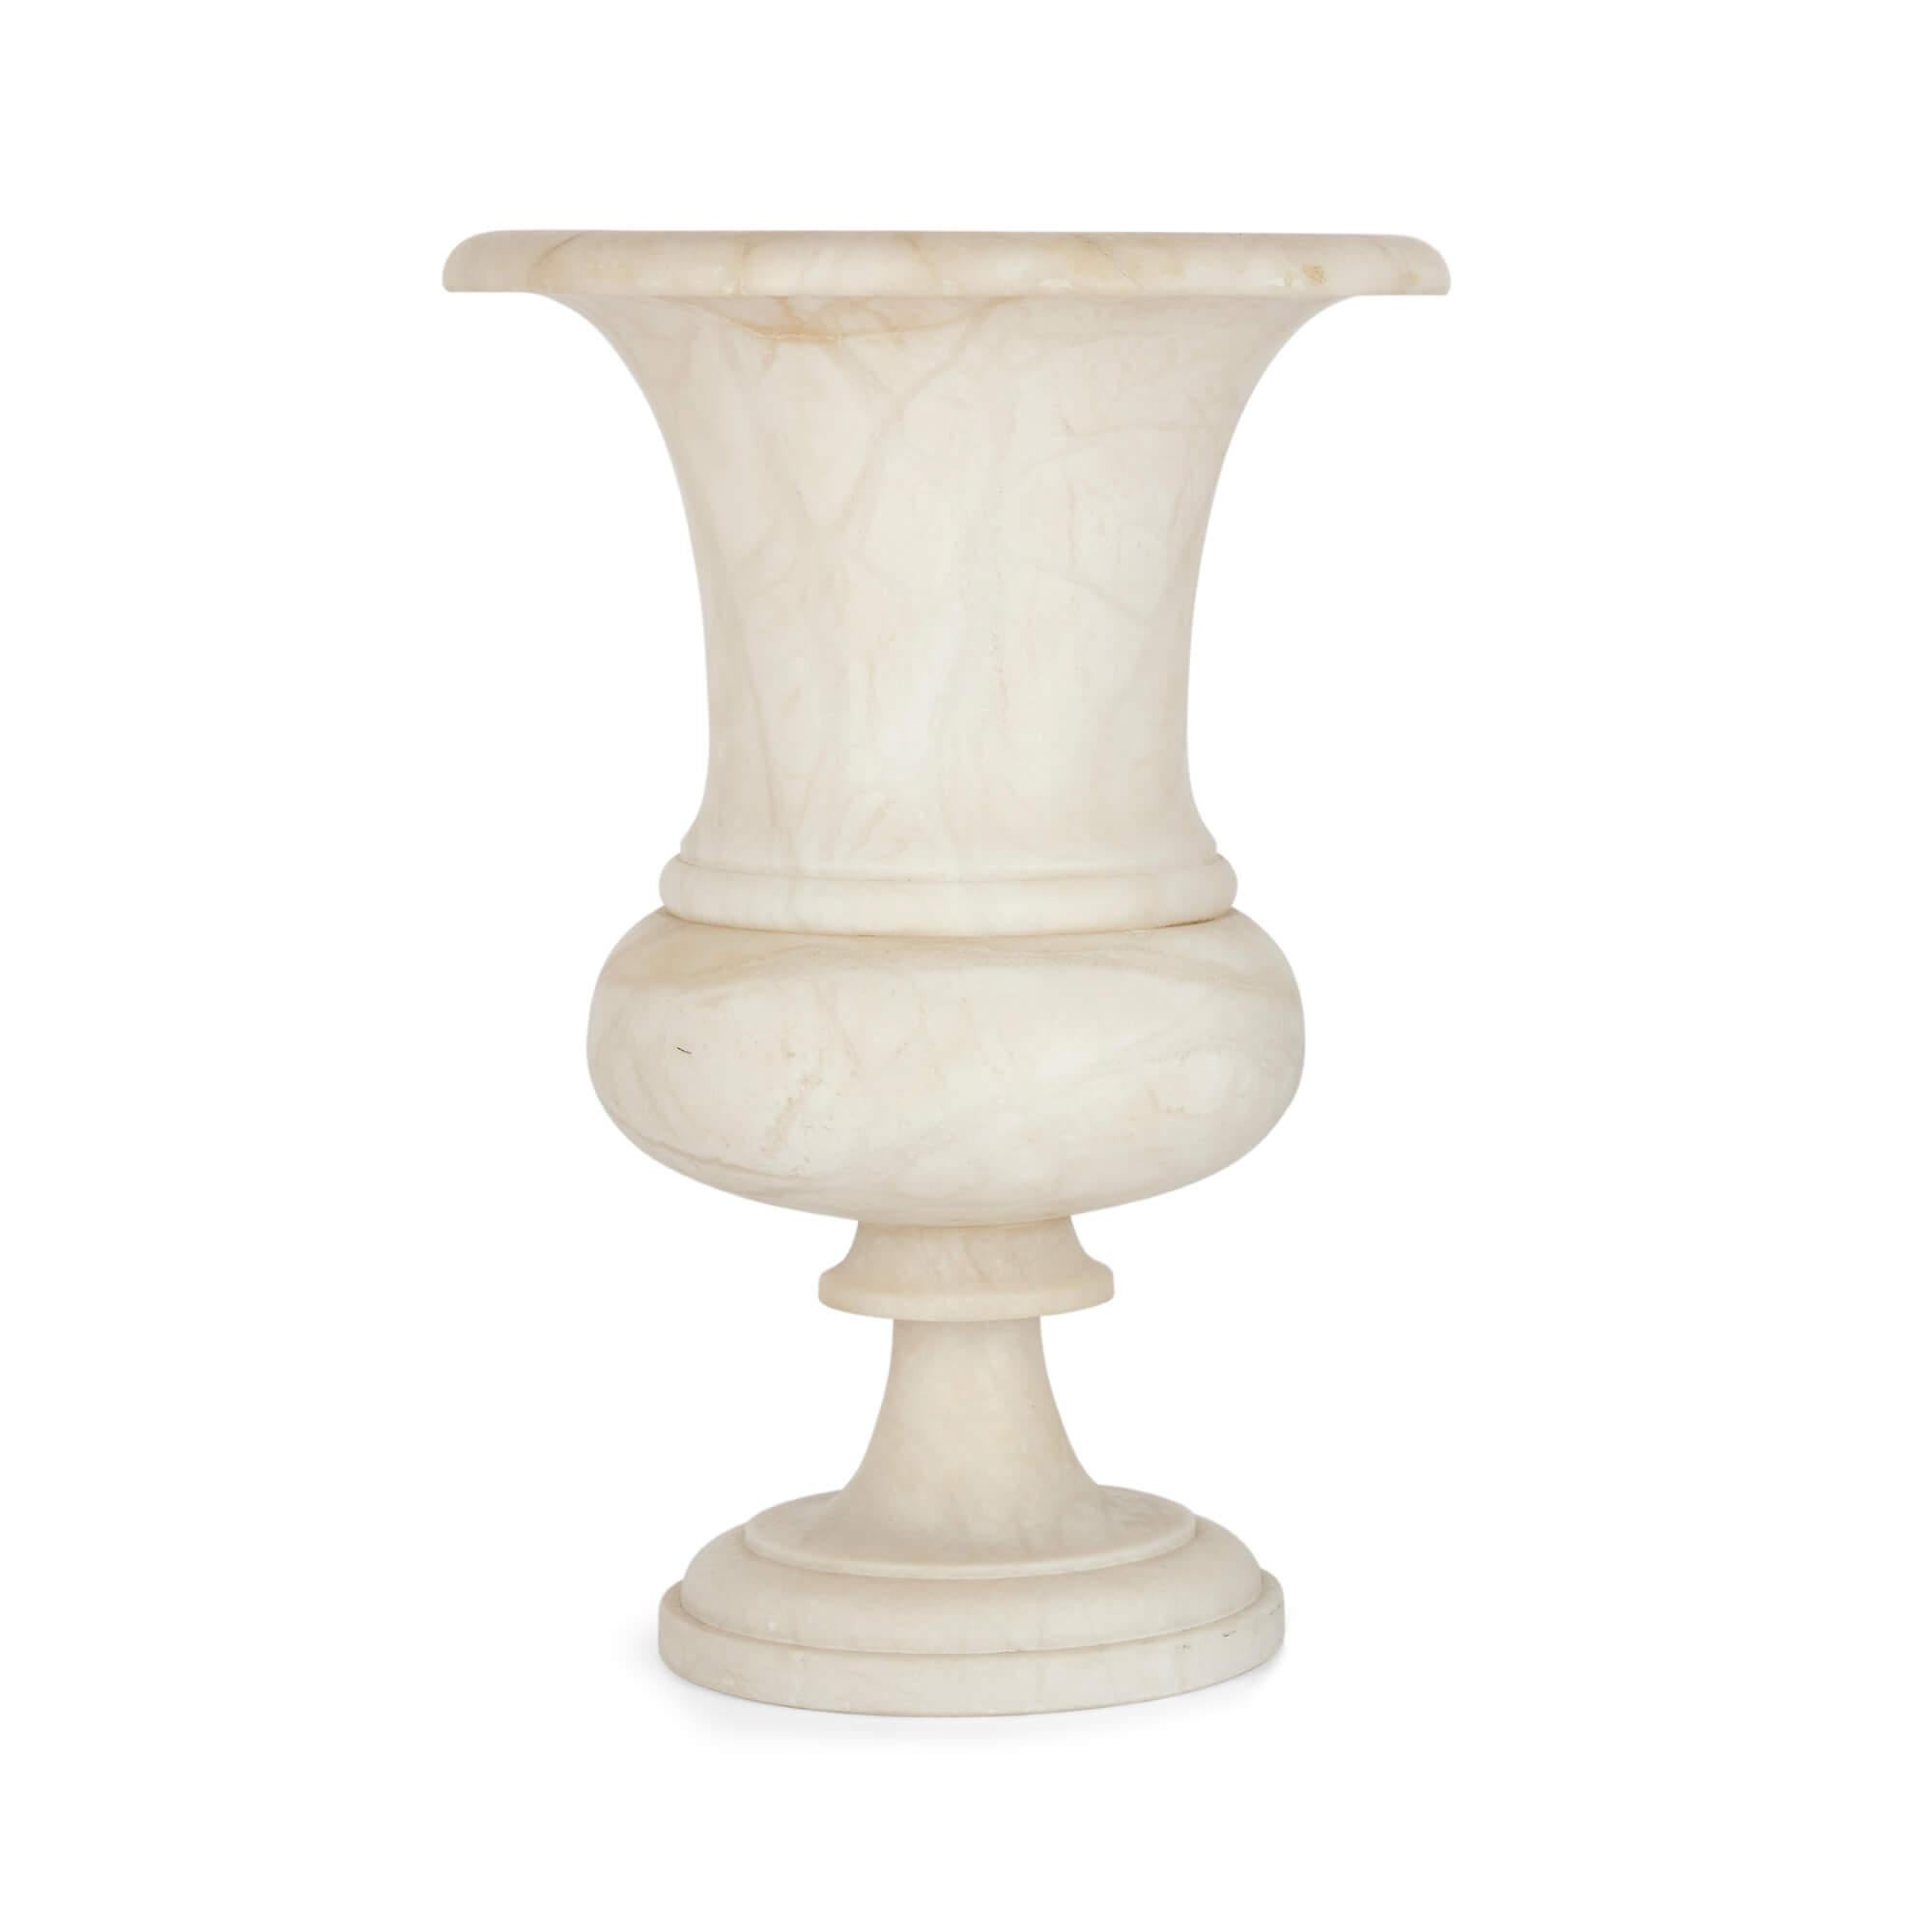 A large alabaster campagna-shaped vase
Continental, 20th century
Measures: Height 34.5cm, diameter 24cm

In a distilled neoclassical style in the so-called campagna shape, this fine vase is made from alabaster, a fine-grained, white, and lightly